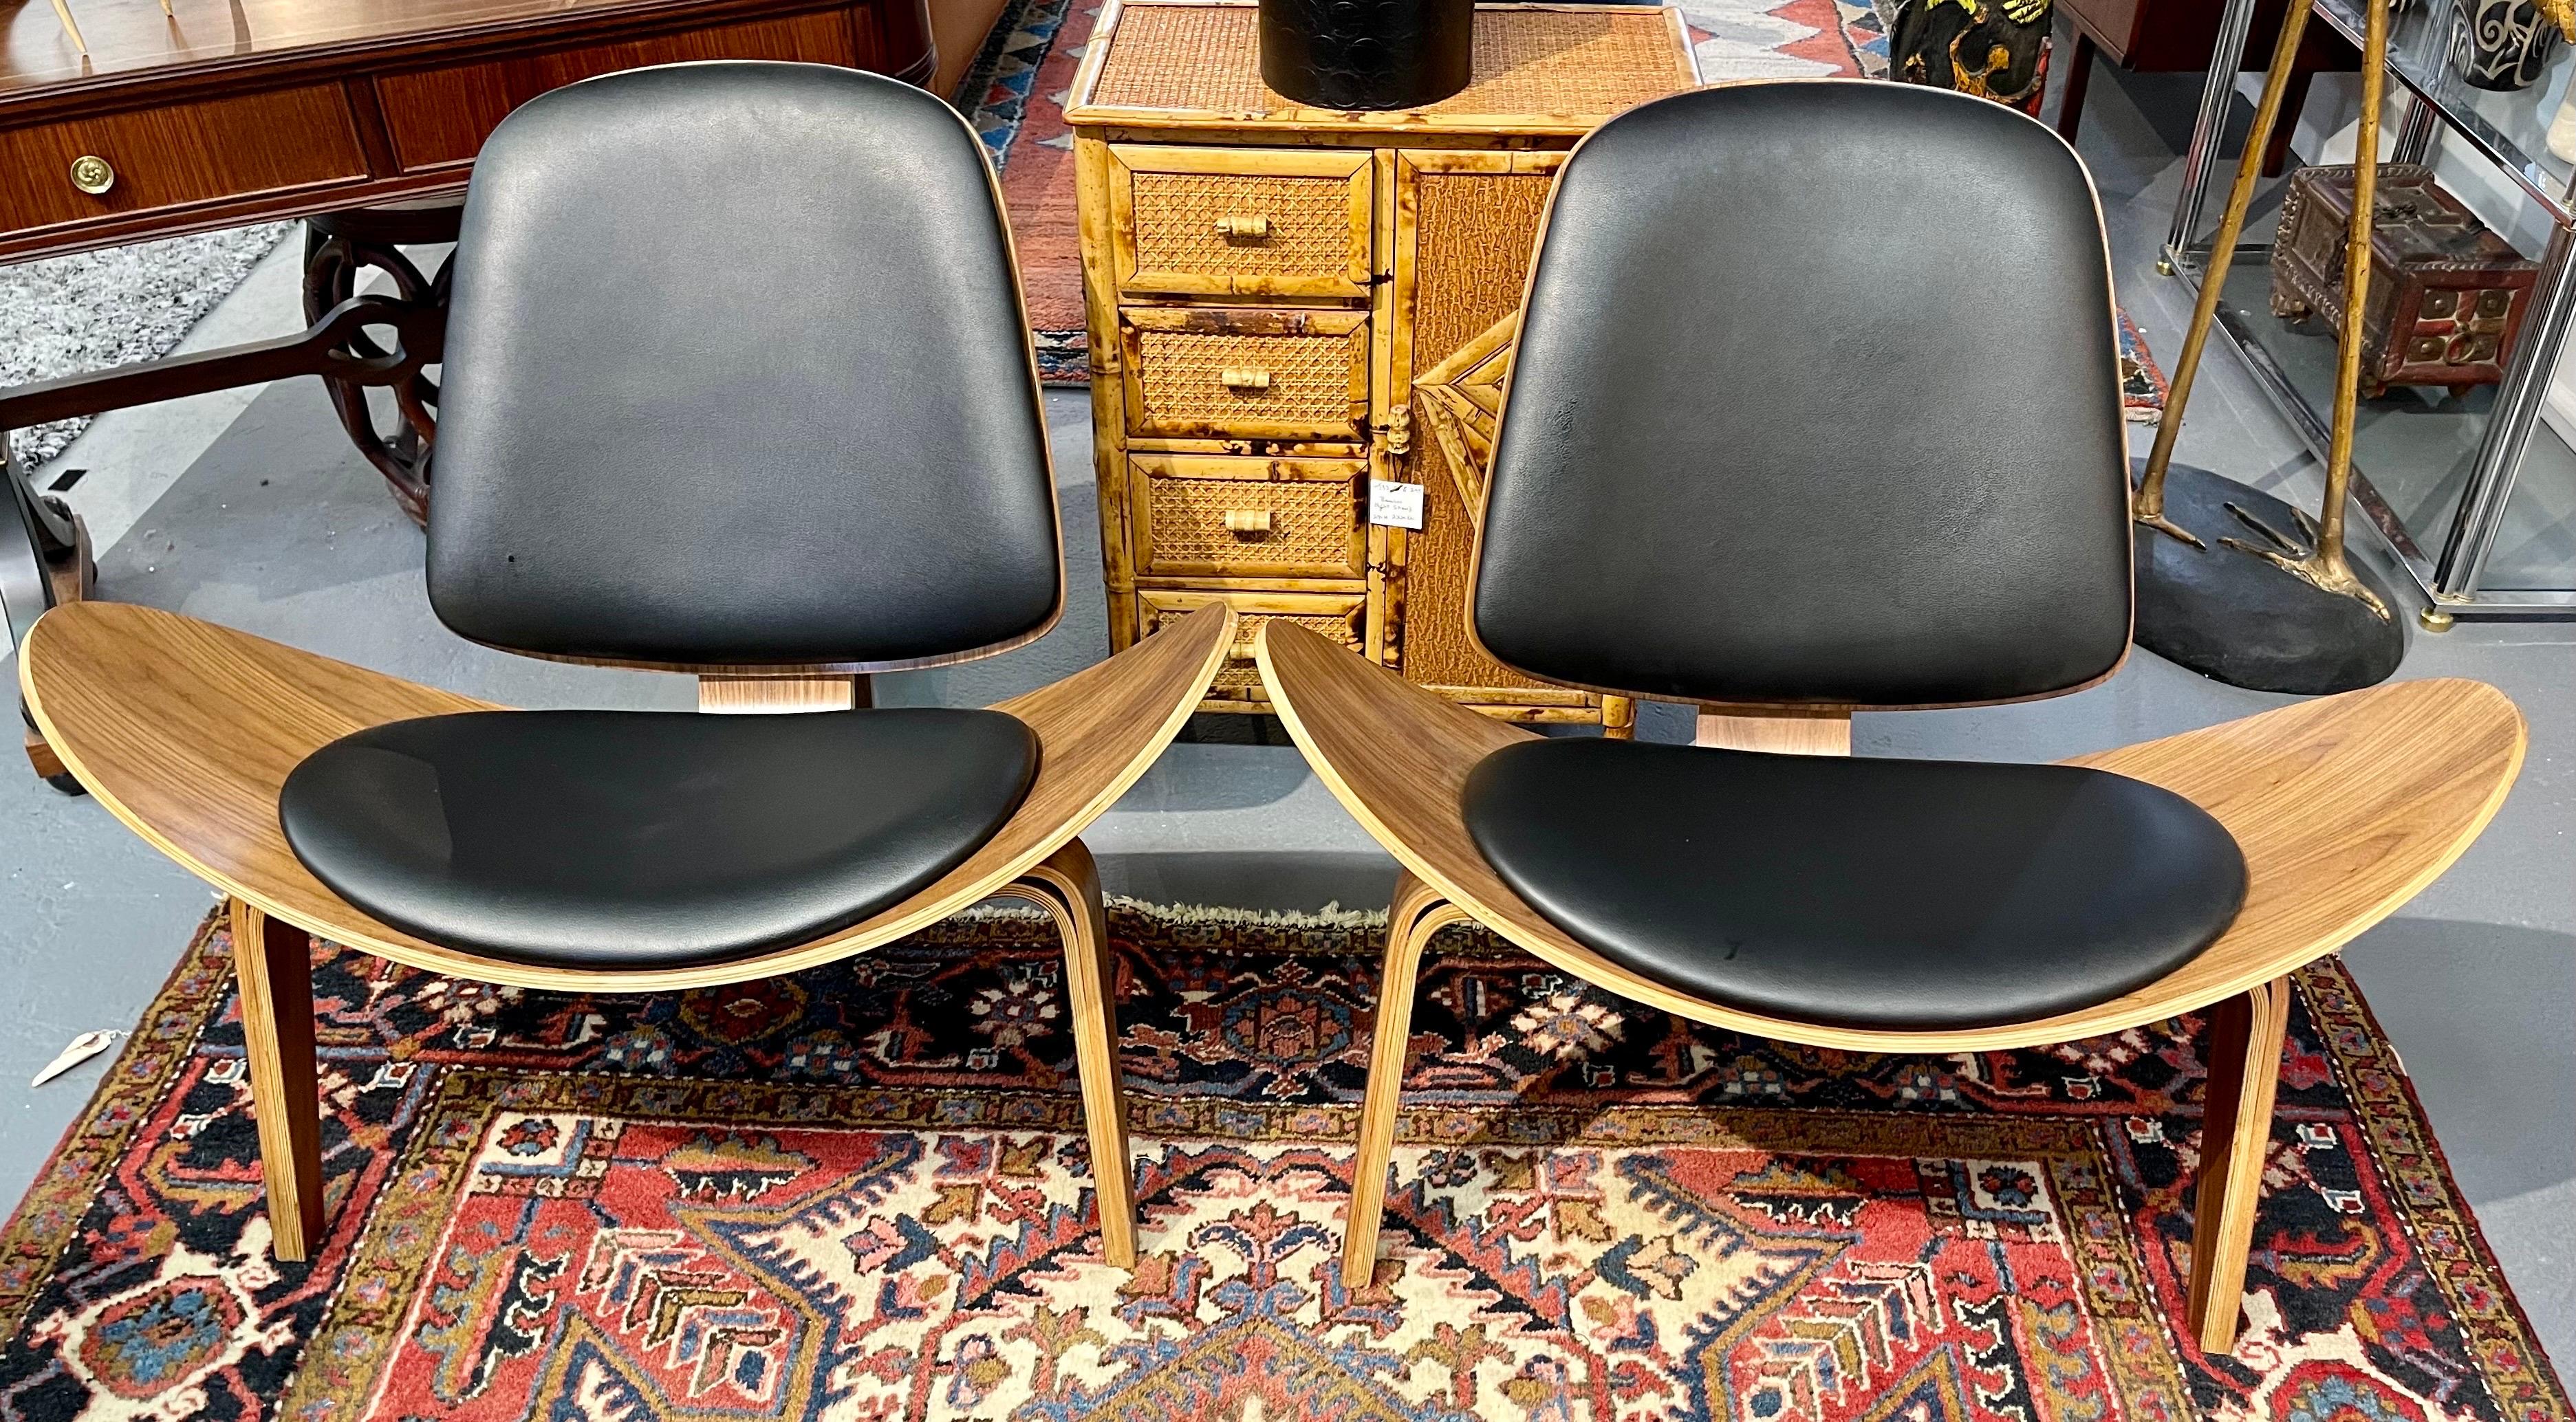 Stellar pair of matching mid century style scoop lounge chairs. They sit very comfortably and have great scale and better lines. Slight recline when seating adds to the comfort. No hallmarks underneath. Why not own the best?